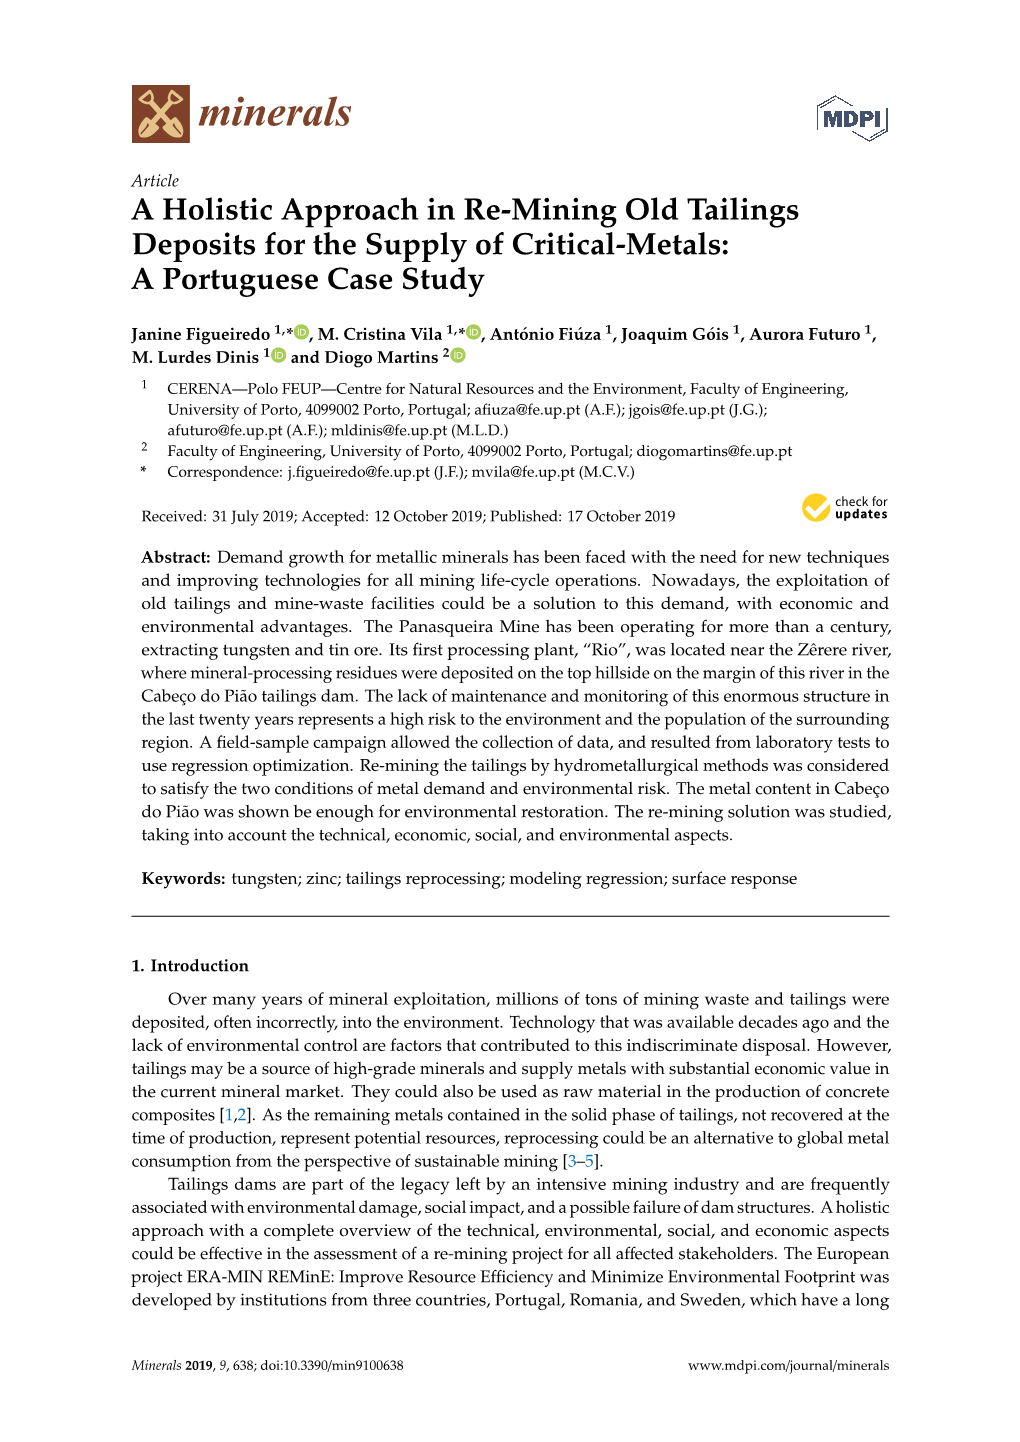 A Holistic Approach in Re-Mining Old Tailings Deposits for the Supply of Critical-Metals: a Portuguese Case Study